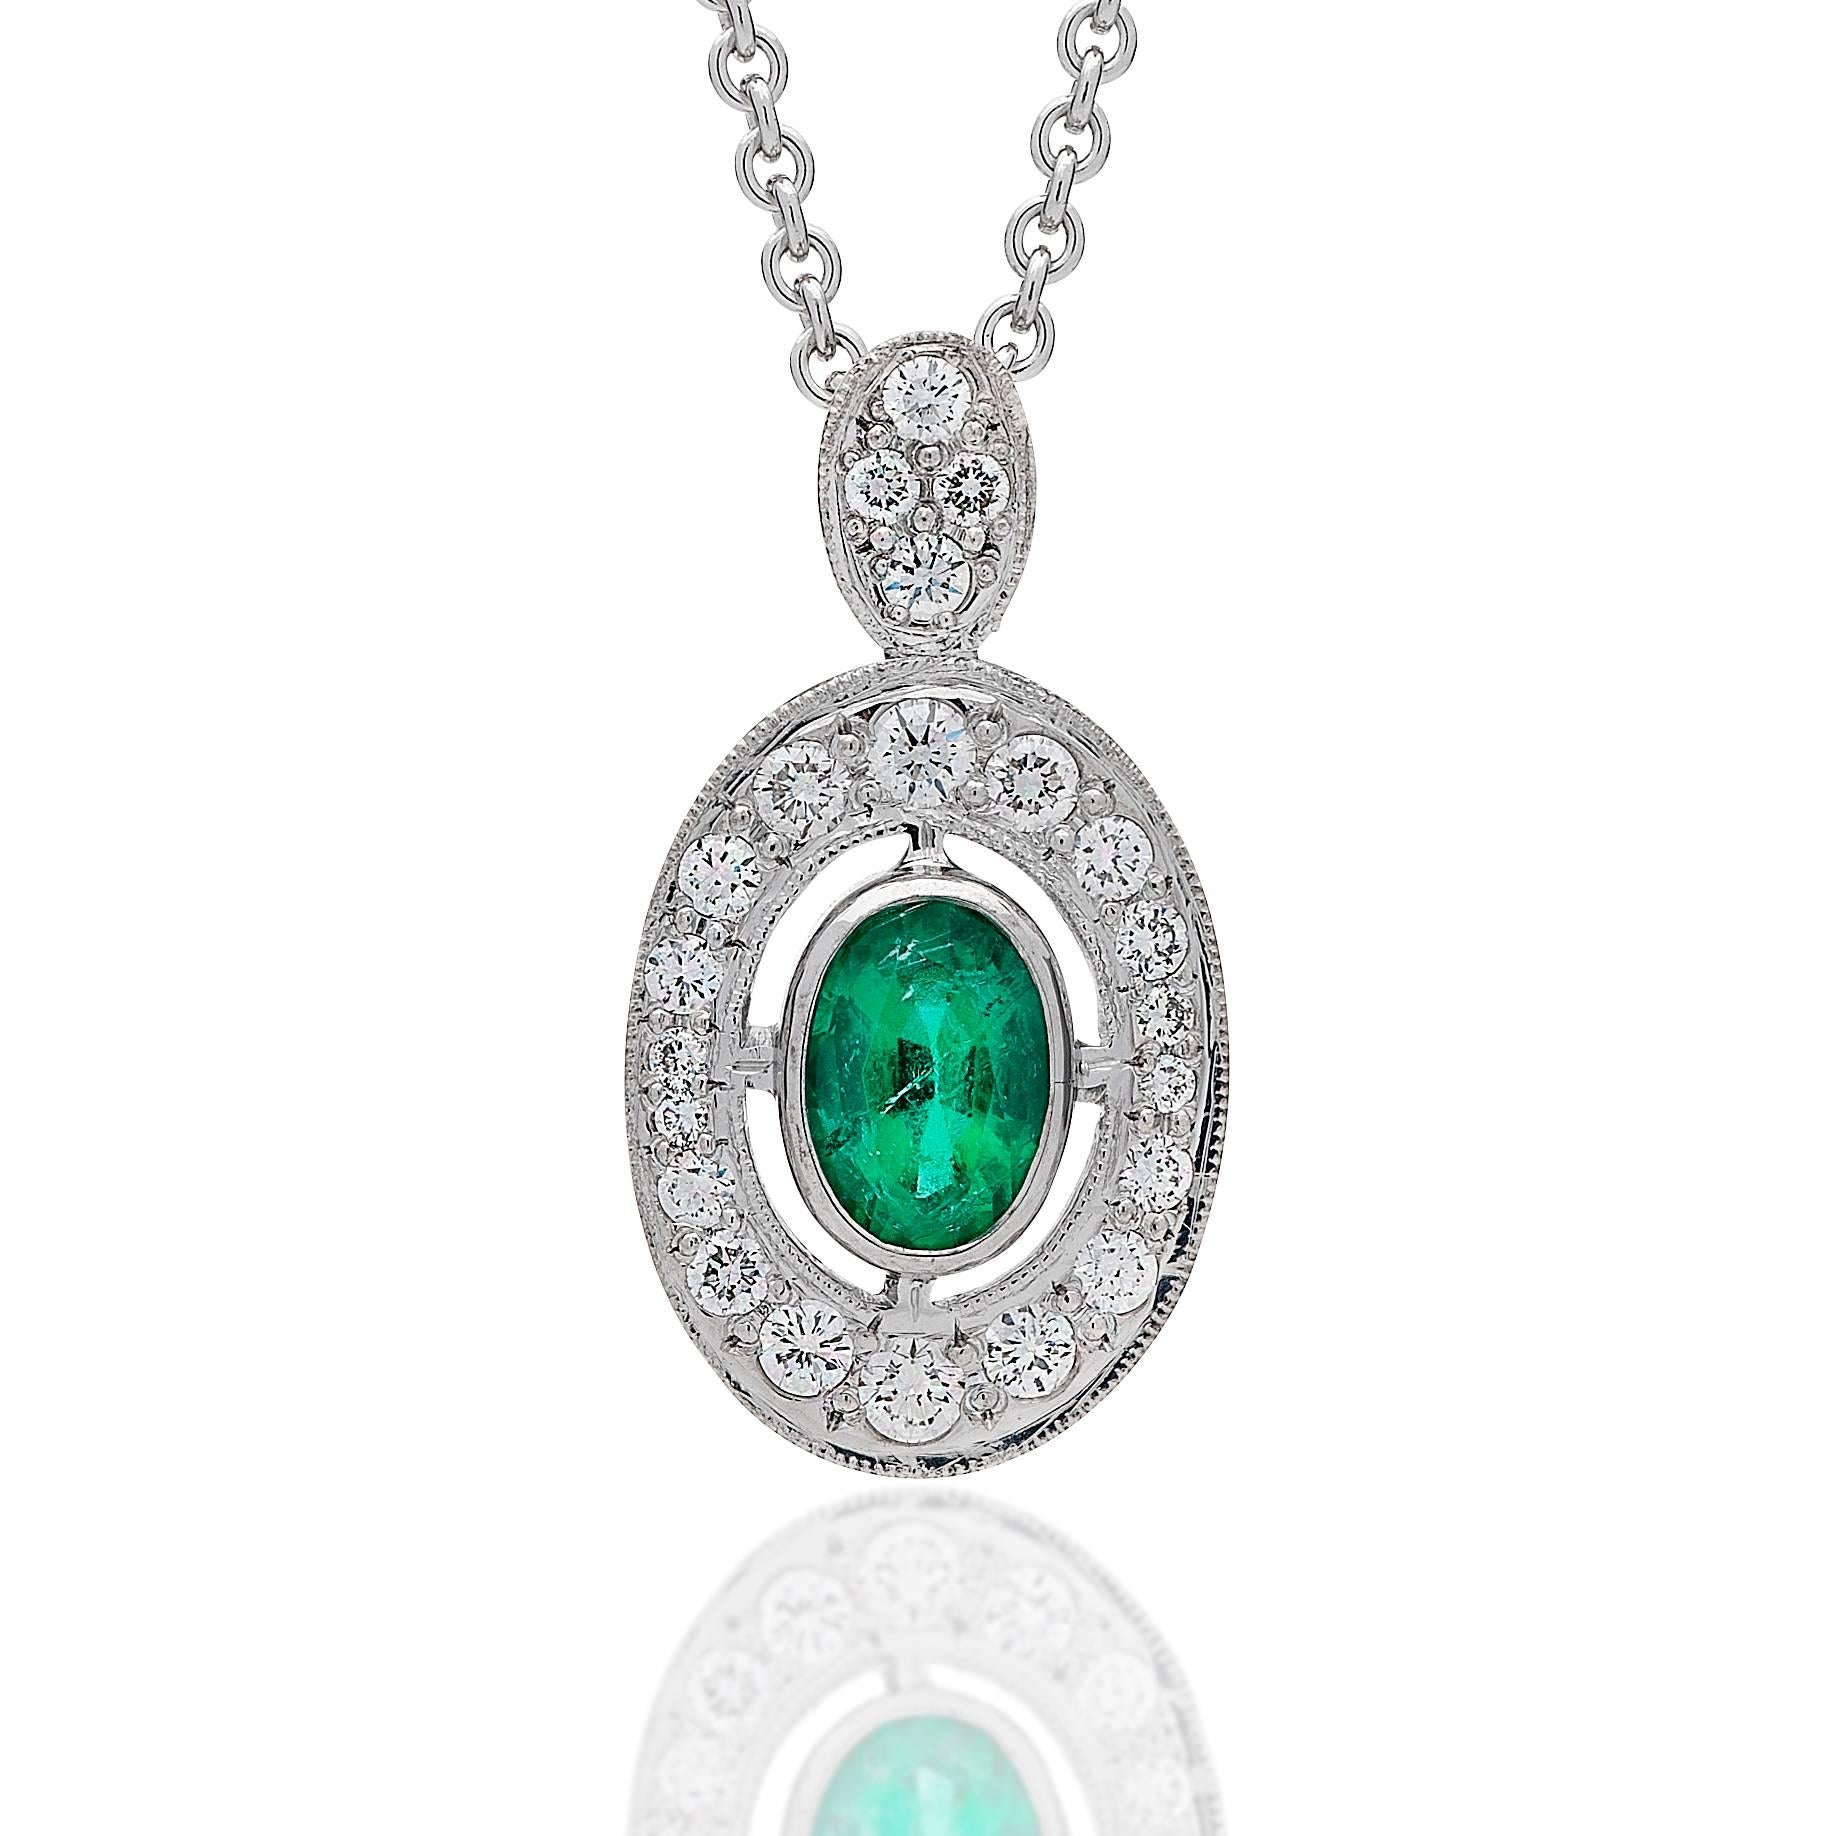 Handmade 18kt white gold 'Halo' style pendant centred with a 0.62ct oval Columbian emerald of bright green colour, fine pique.  Surrounded by 0.35cts of brilliant cut diamonds G/H Si1.

*Excludes Chain - Pendant Only*
